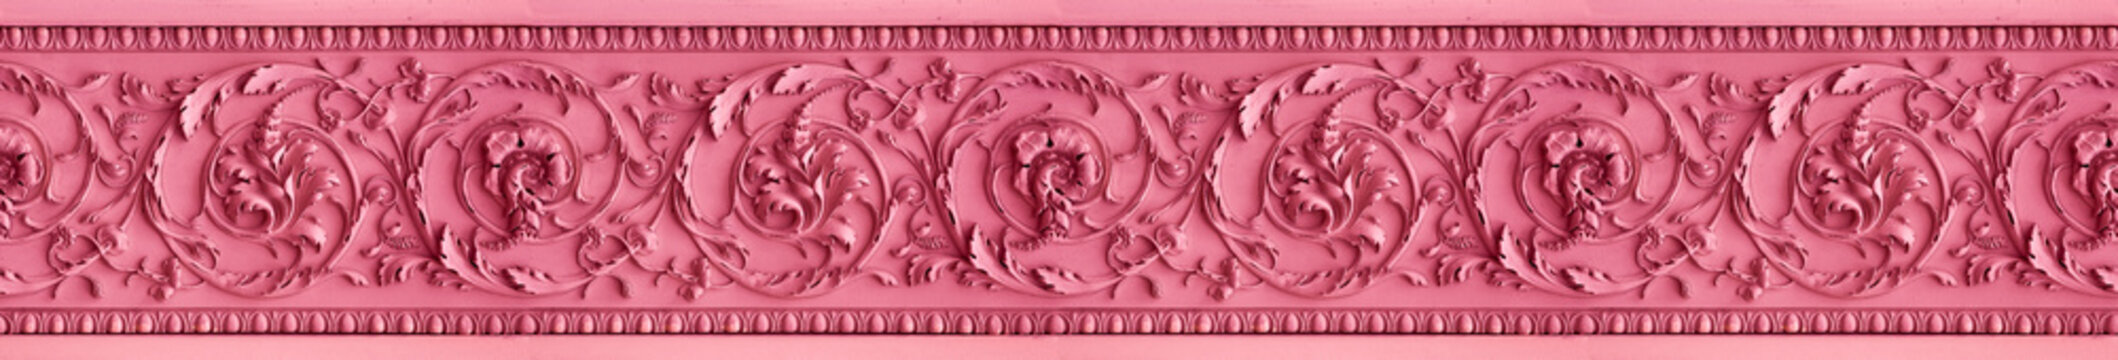 Pink neoclassical stucco frame with floral elements - seamless pattern useful for renderings applications